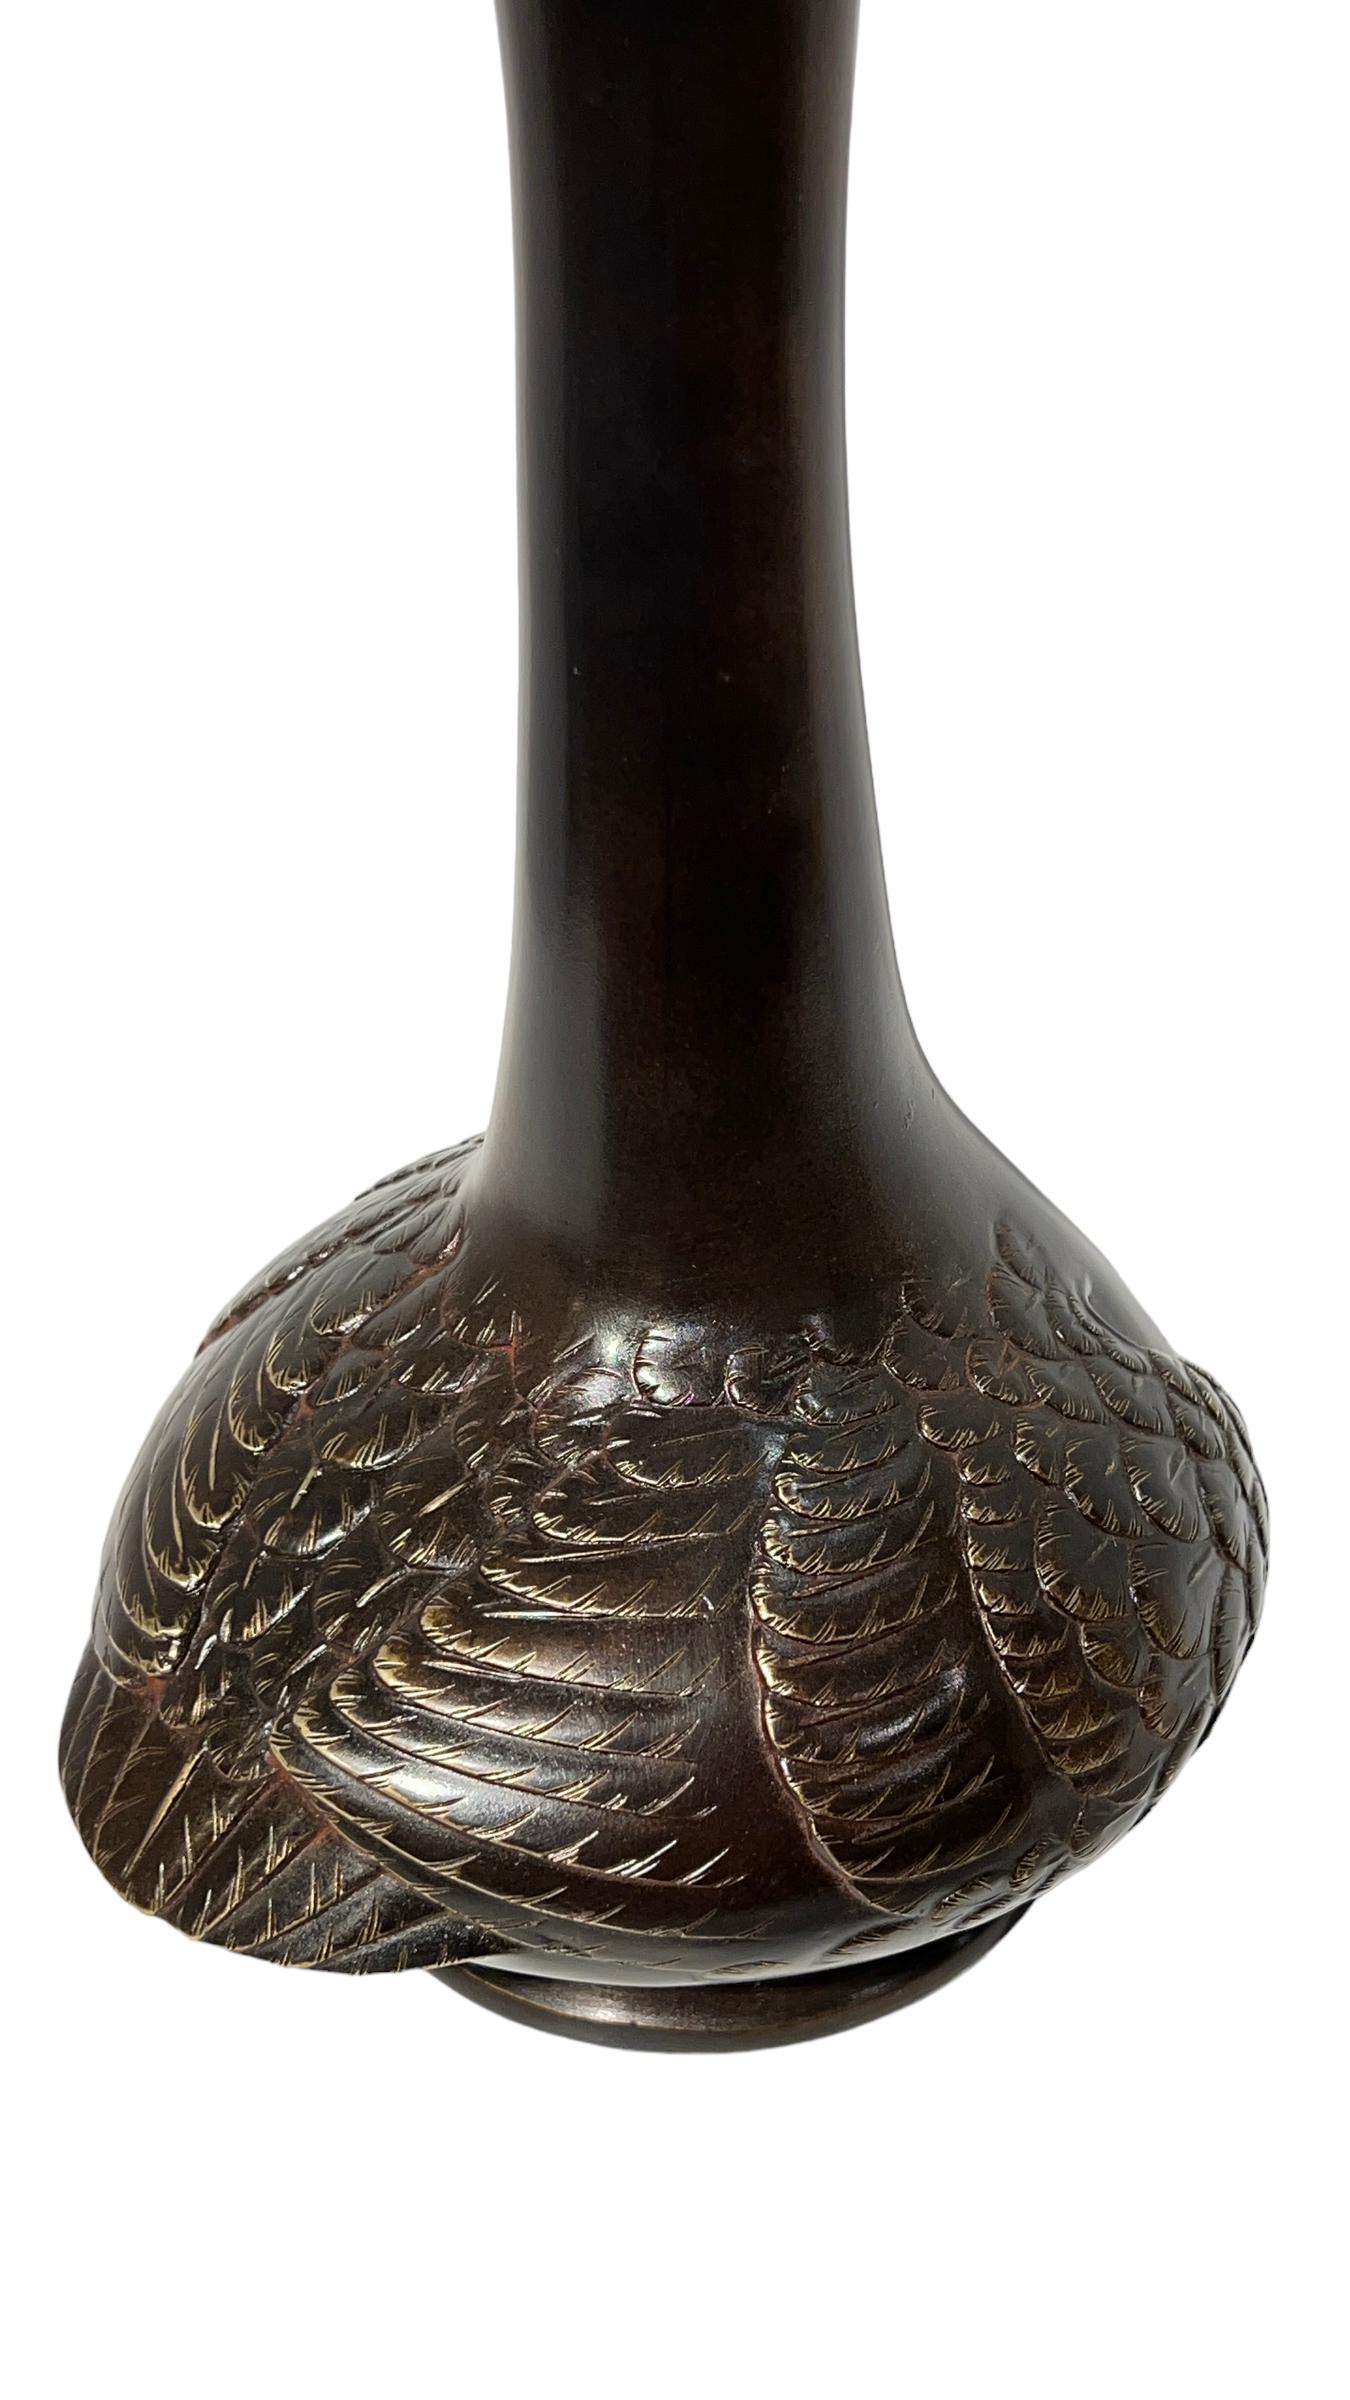 Antique 19th Century Japanese Meiji Period Bronze Vase with Bird Form In Good Condition For Sale In New York, NY